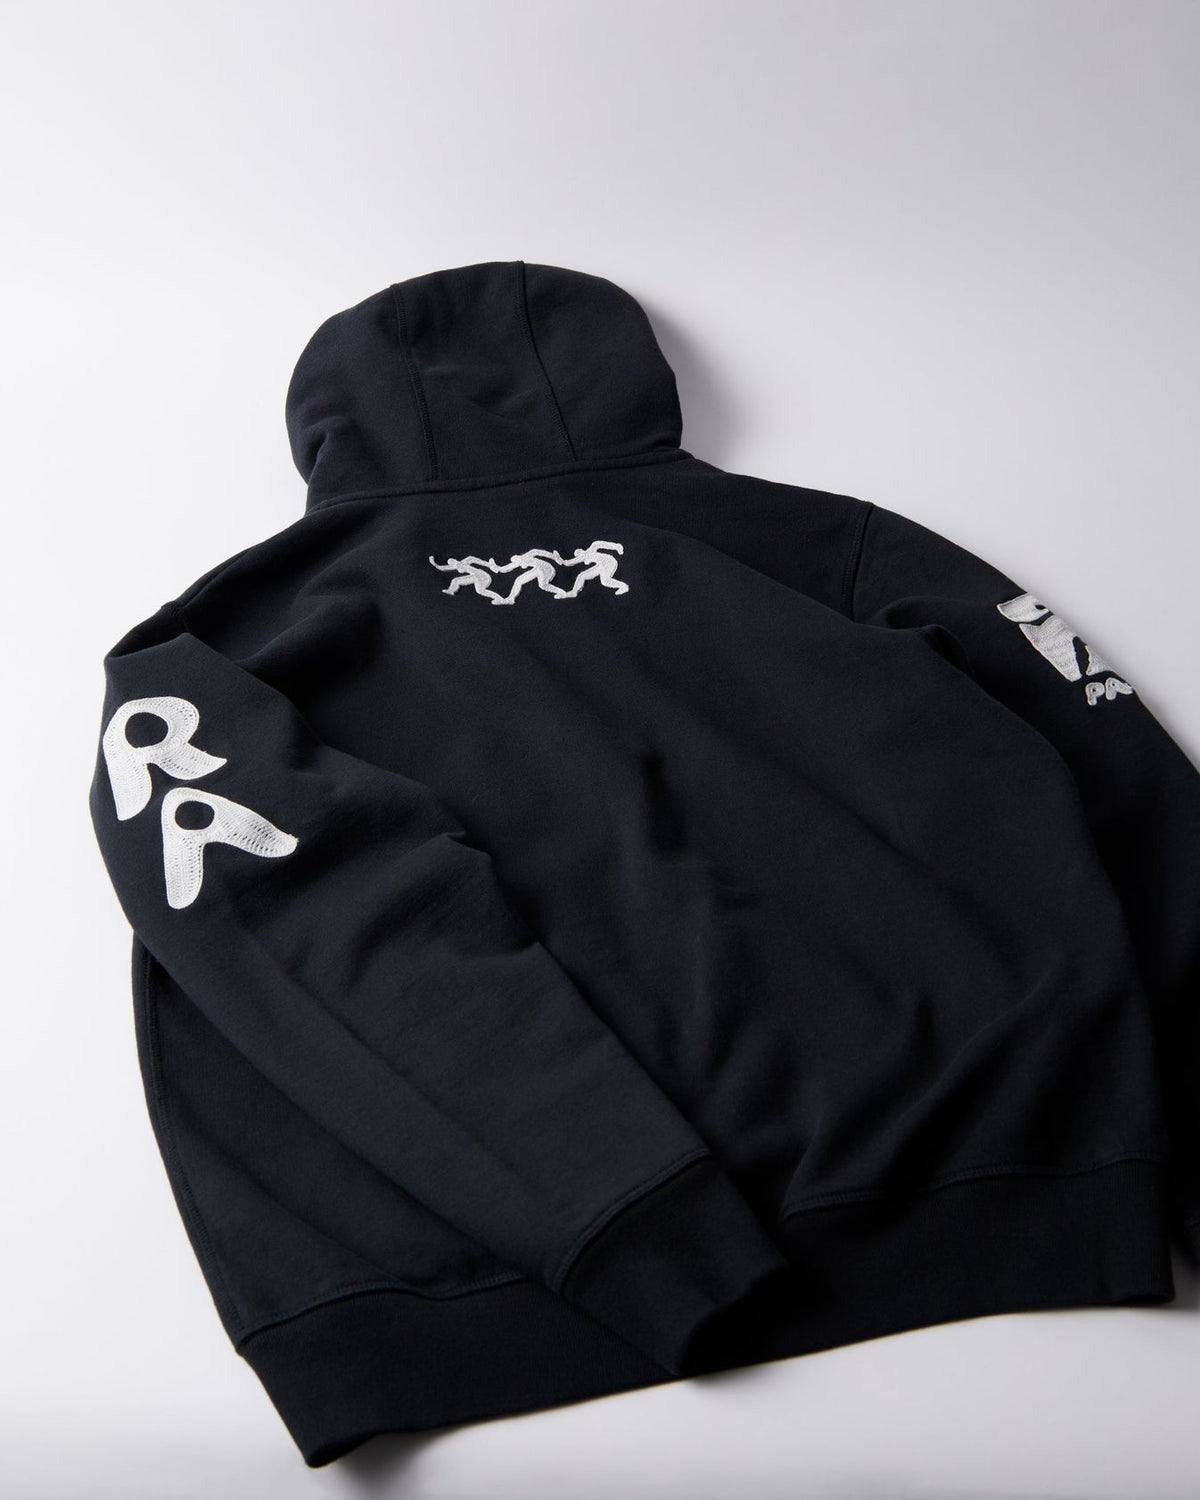 By Parra Zipped pigeon zip hooded